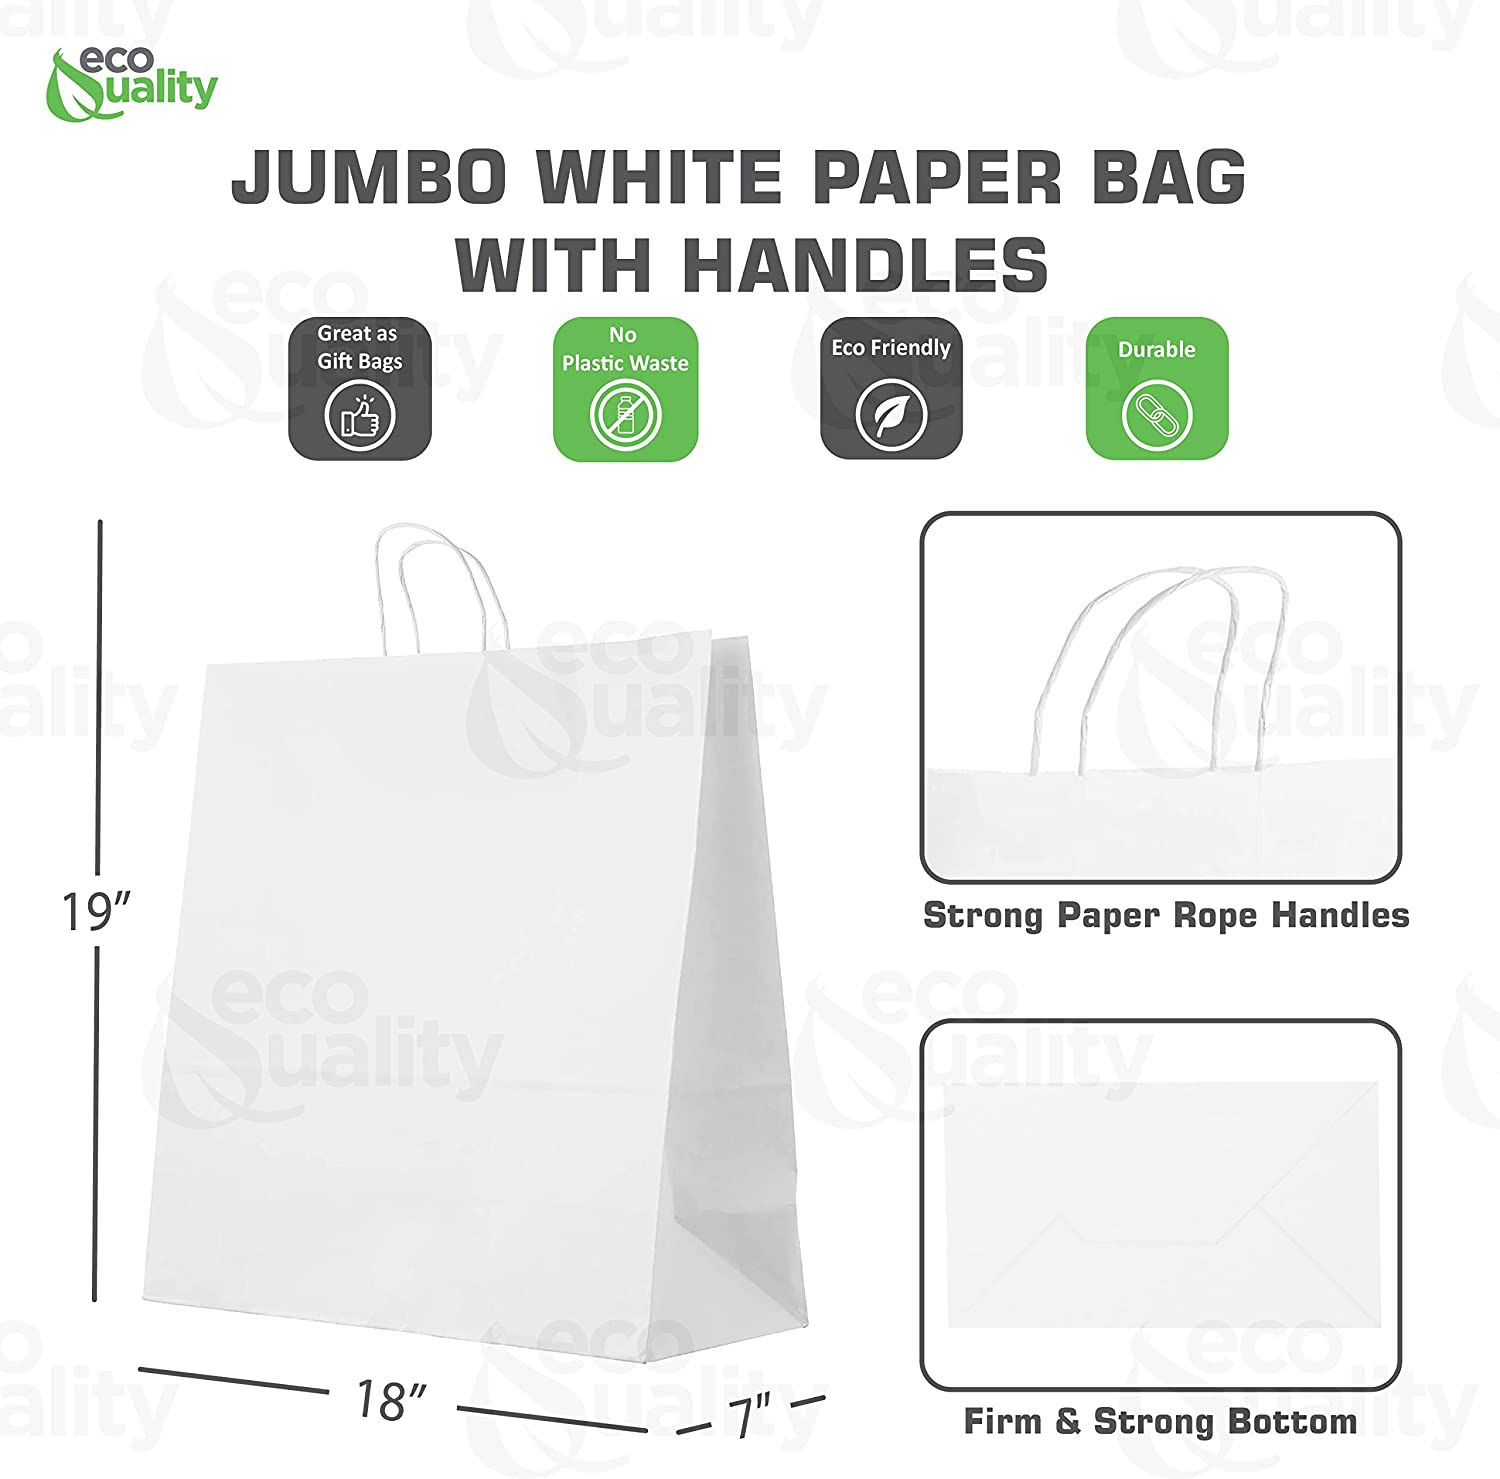 Reusable Recycled Material 20 Pounds White Gift Bag DYI Paper Bag Heavy Duty Strong Paper Bag Supermarket paper bags carry out bags Paper Bags with handles Paper Take Out Grocery Bags White Kraft Bags Ecofriendly Paper Bag Retail Merchandise bag white Paper Shopping Bags takeout bag Paper Bag Disposable Large 18x7x19 inches